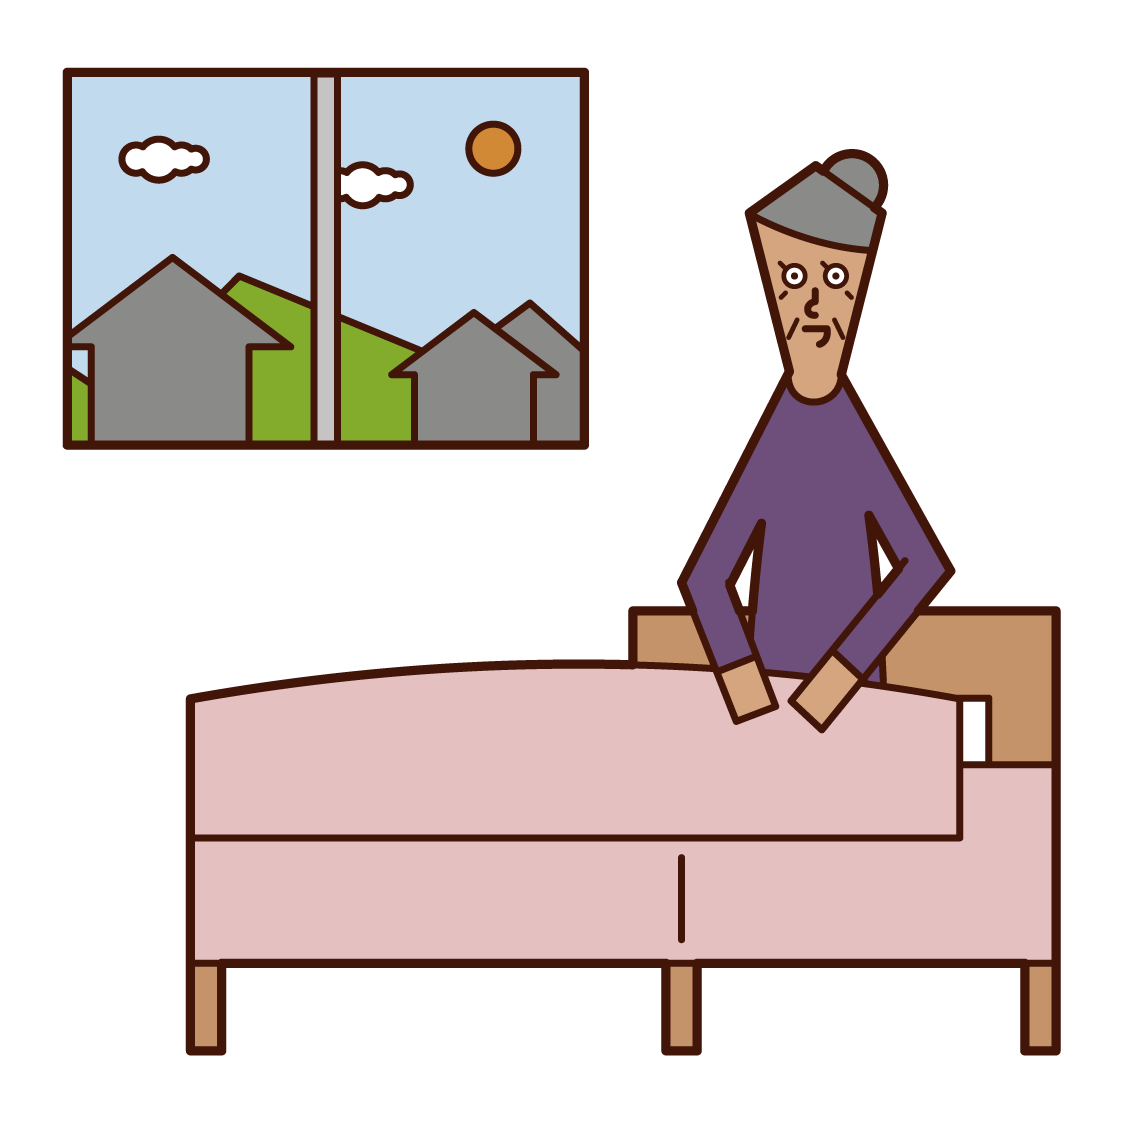 Illustration of a person (grandmother) who wakes up